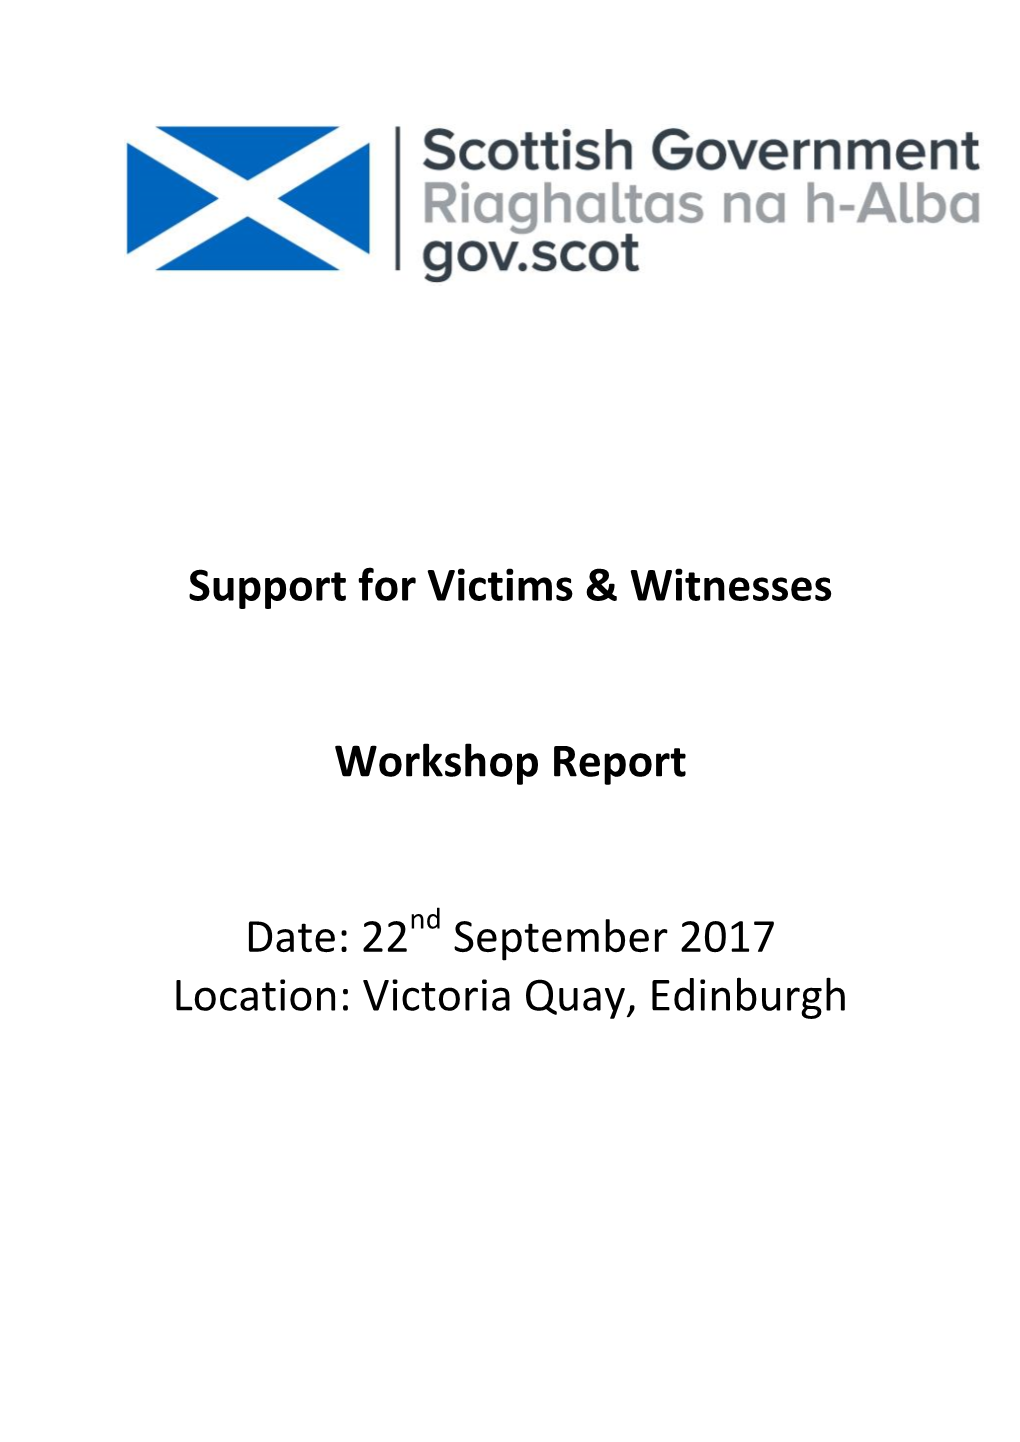 Support for Victims and Witnesses